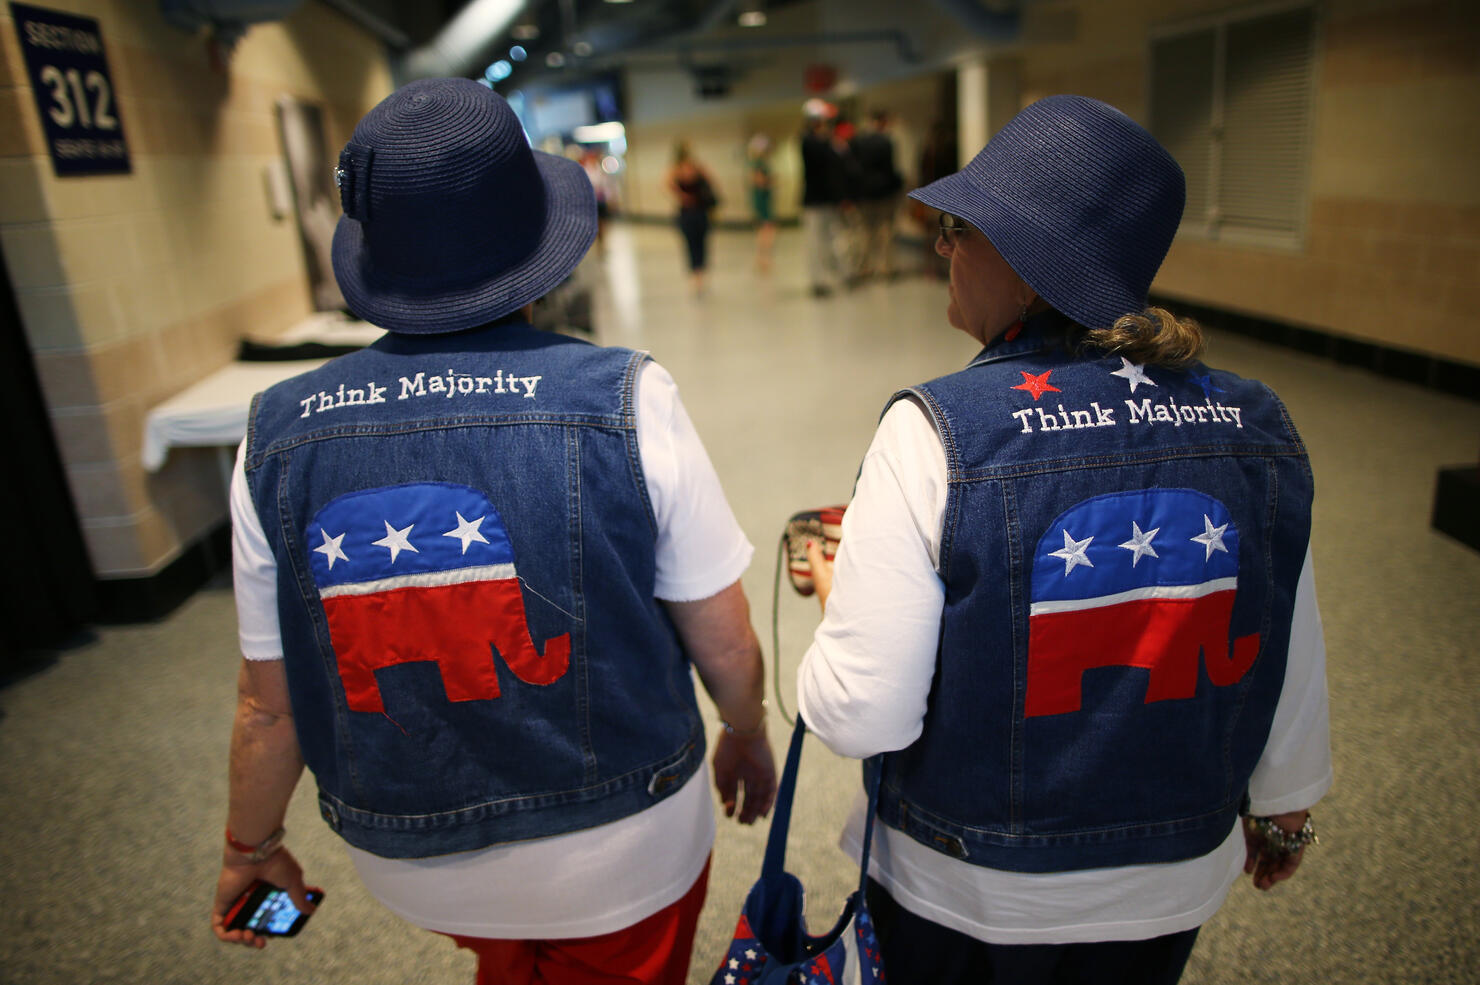 2012 Republican National Convention: Day 3